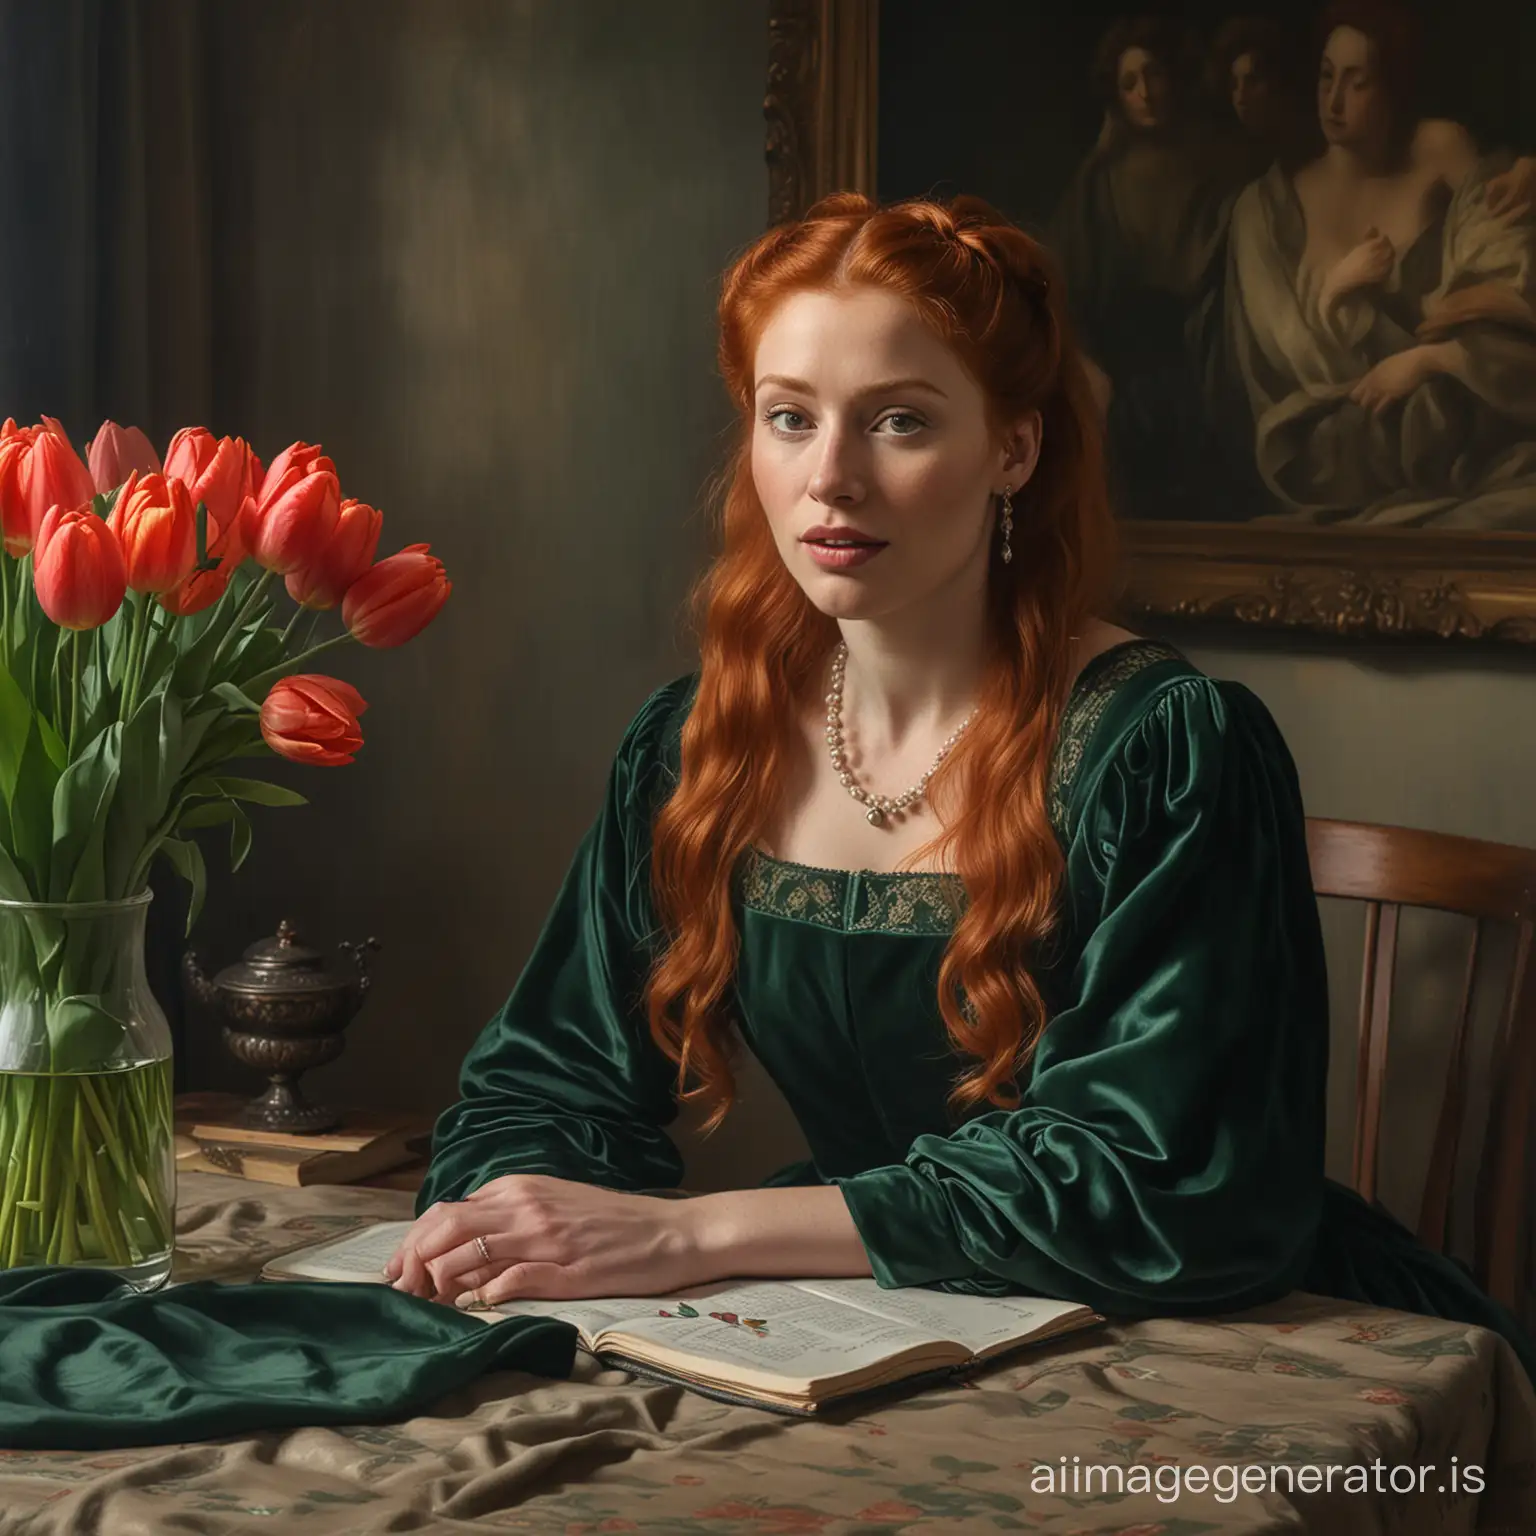 Dramatic-Portrait-RedHaired-Woman-in-Green-Velvet-Dress-with-Tulips